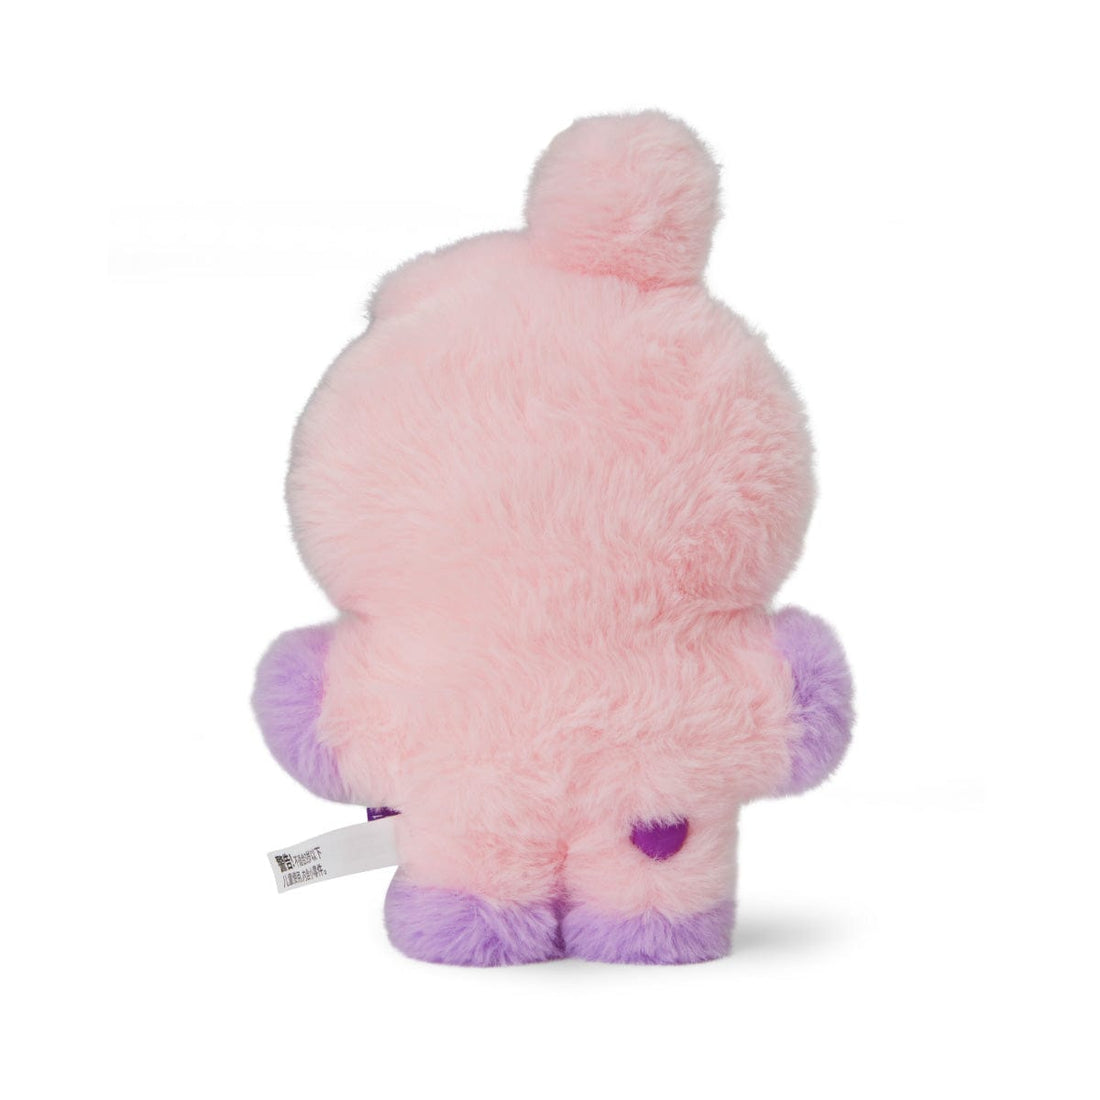 BT21 TOYS COOKY BT21 BABY COOKY FLAT FUR STANDING DOLL PURPLE HEART EDITION